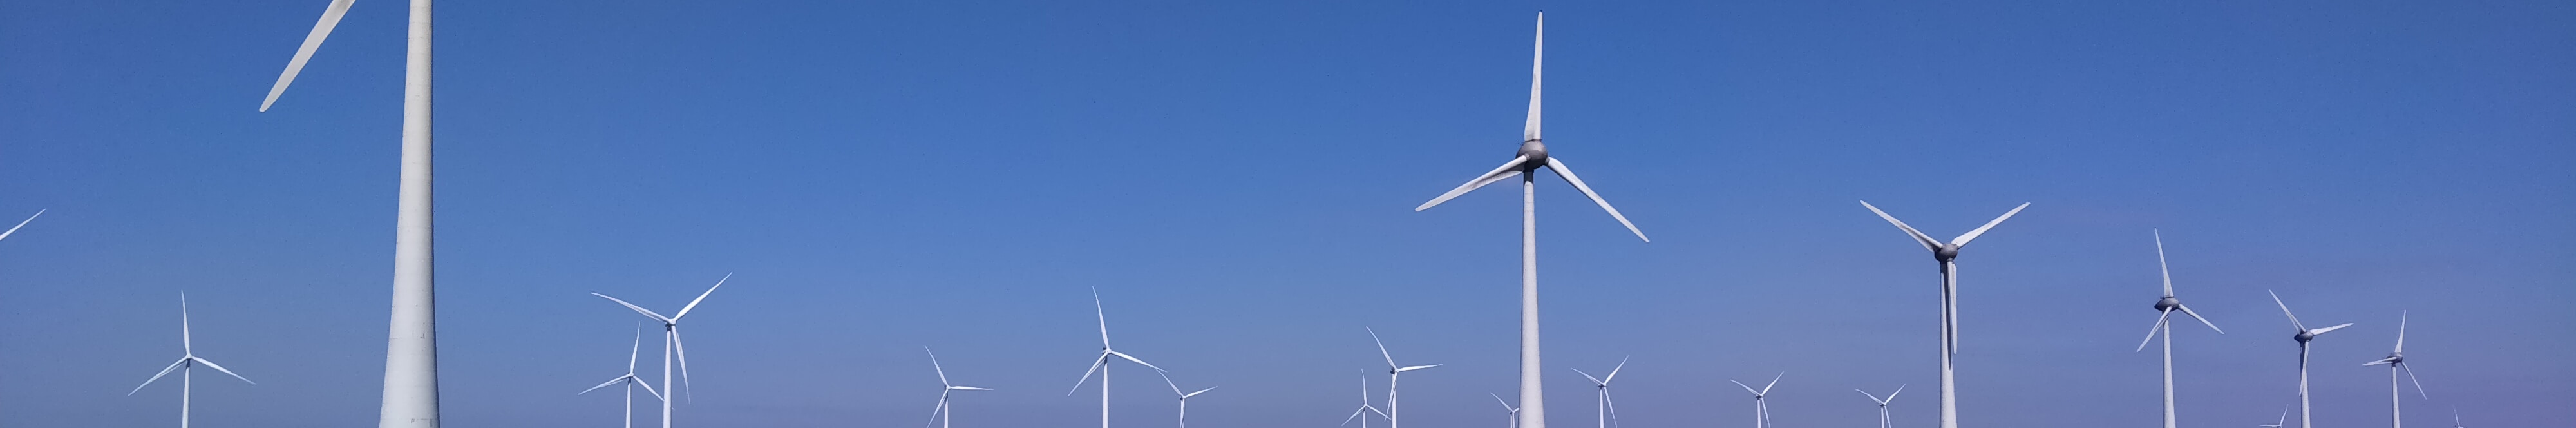 Schweiter Technologies' provides core materials for wind turbines in the renewable energy sector